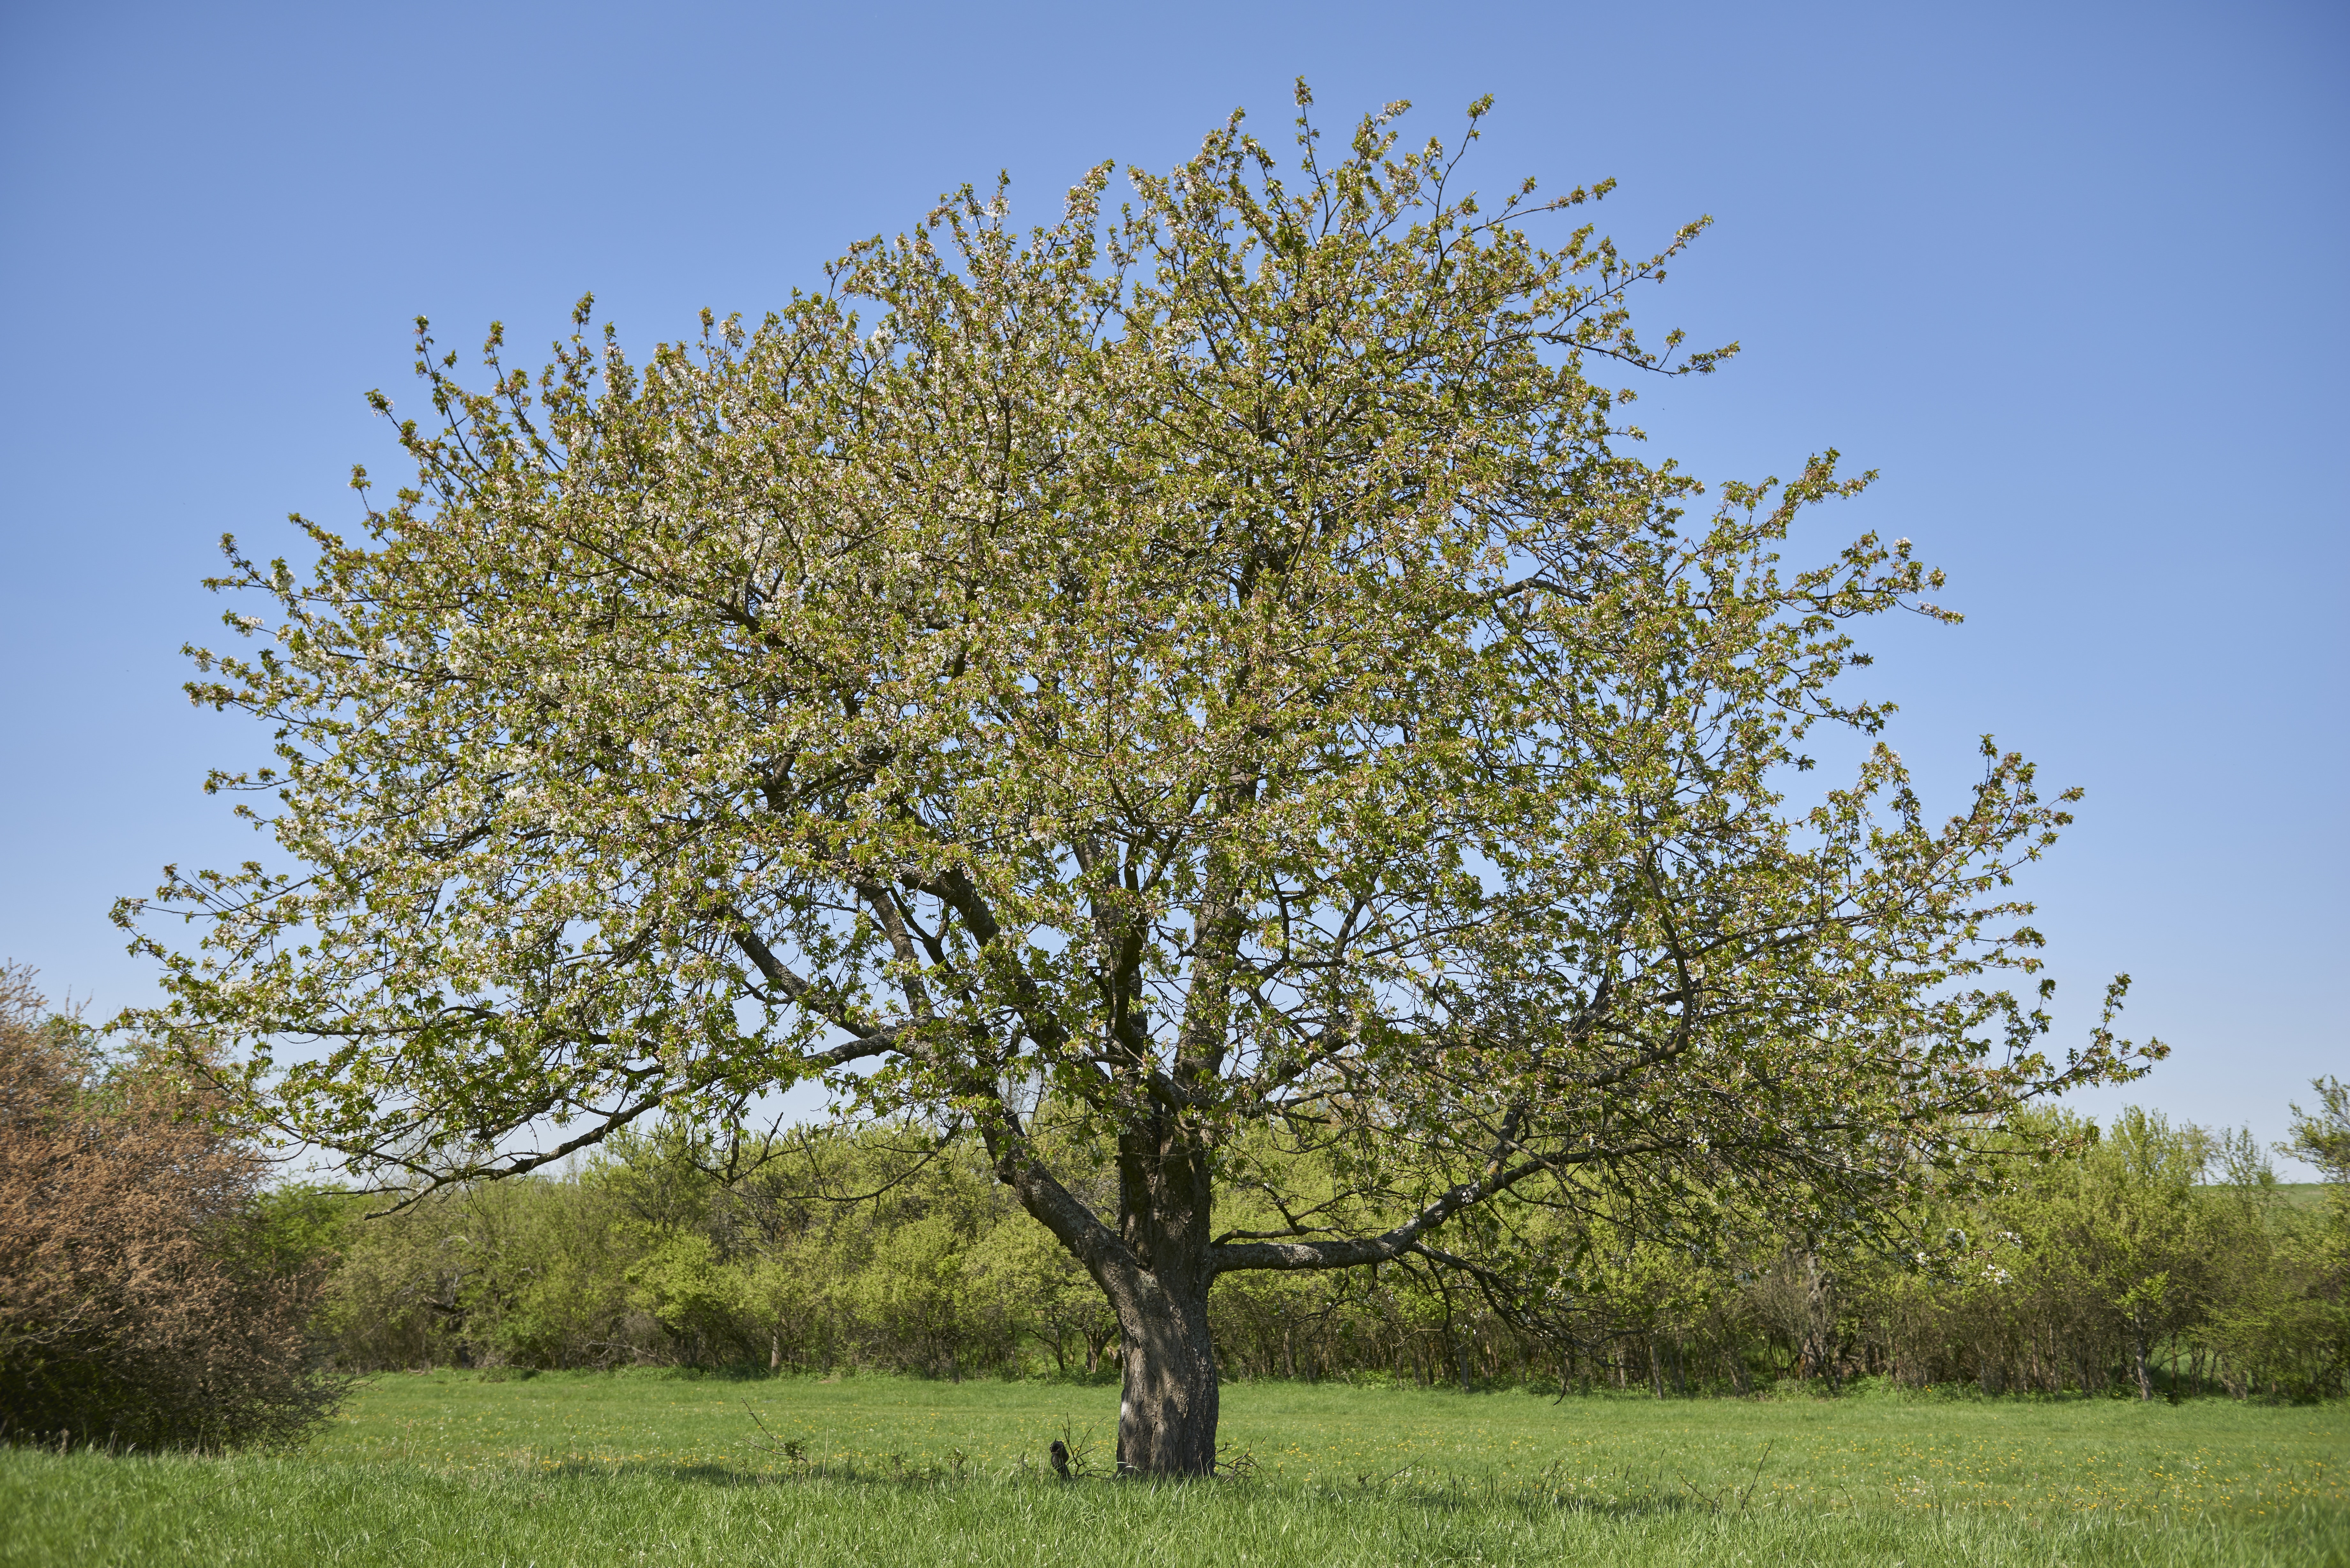 green leaved tree on green grass ground under blue sky during daytime